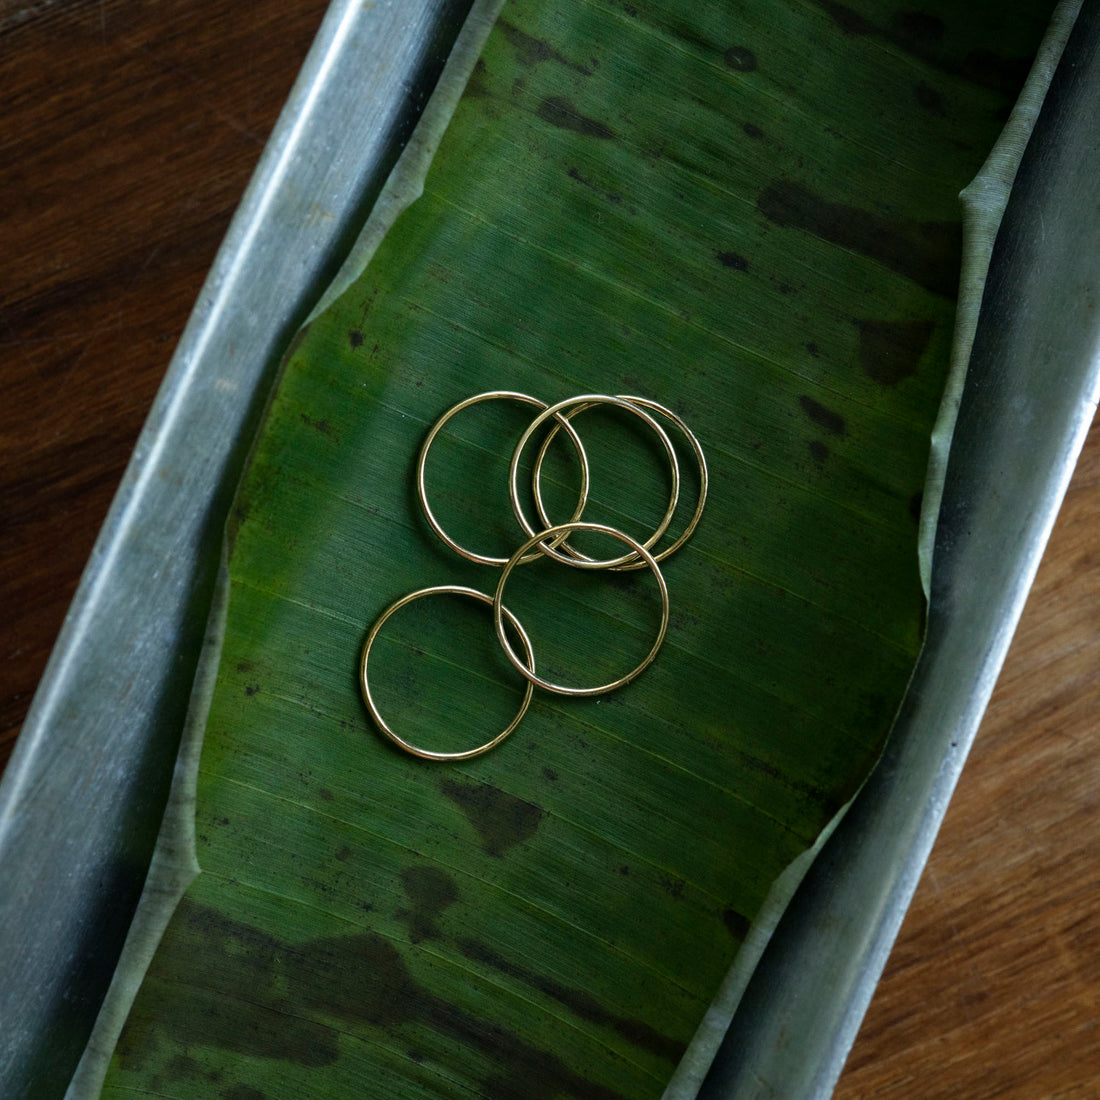 14k Gold Stackable Ring